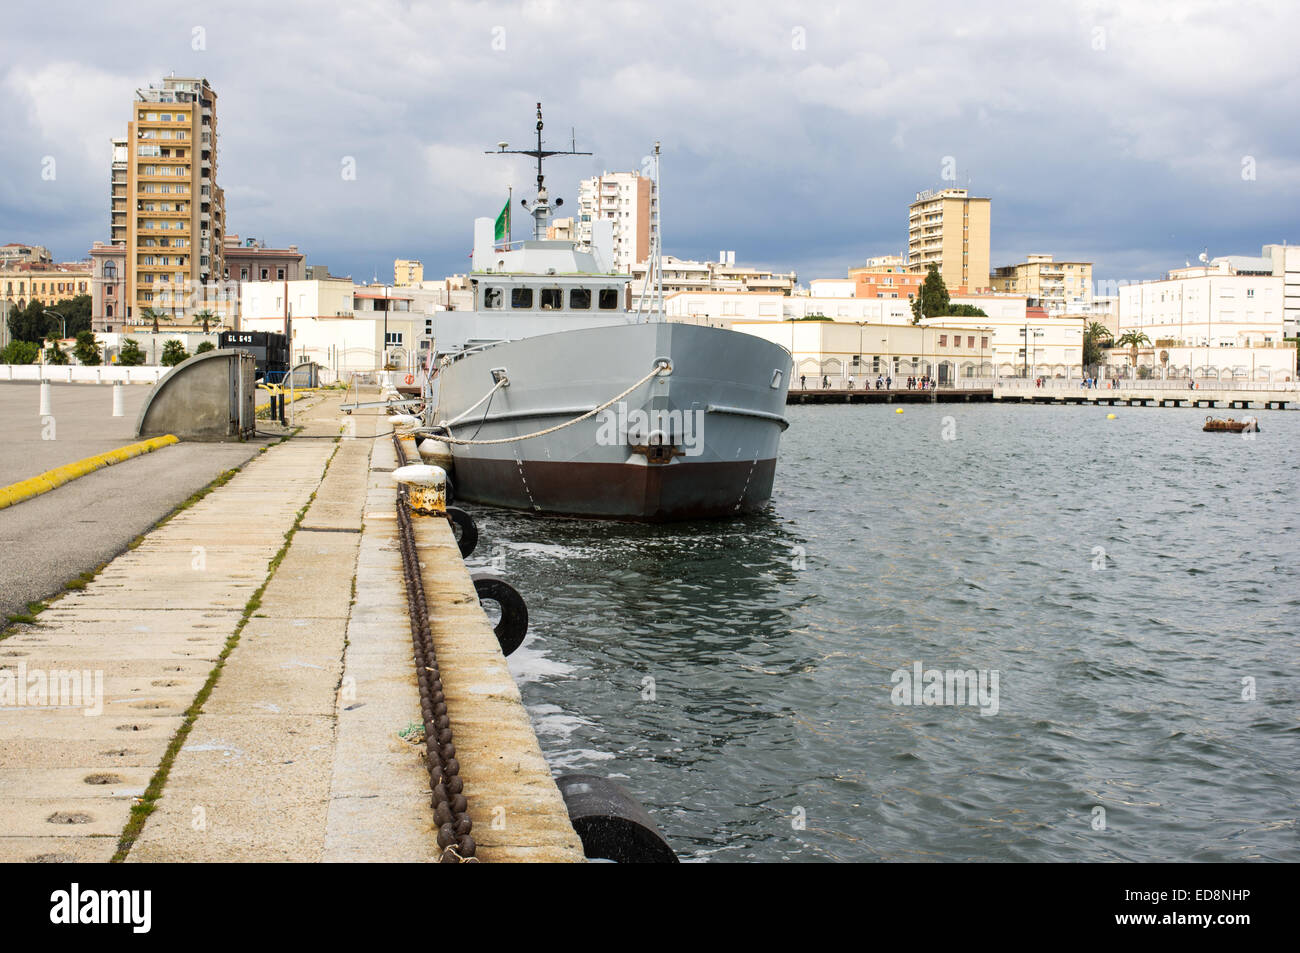 Italian navy ship on the quay at the port of Cagliari Stock Photo